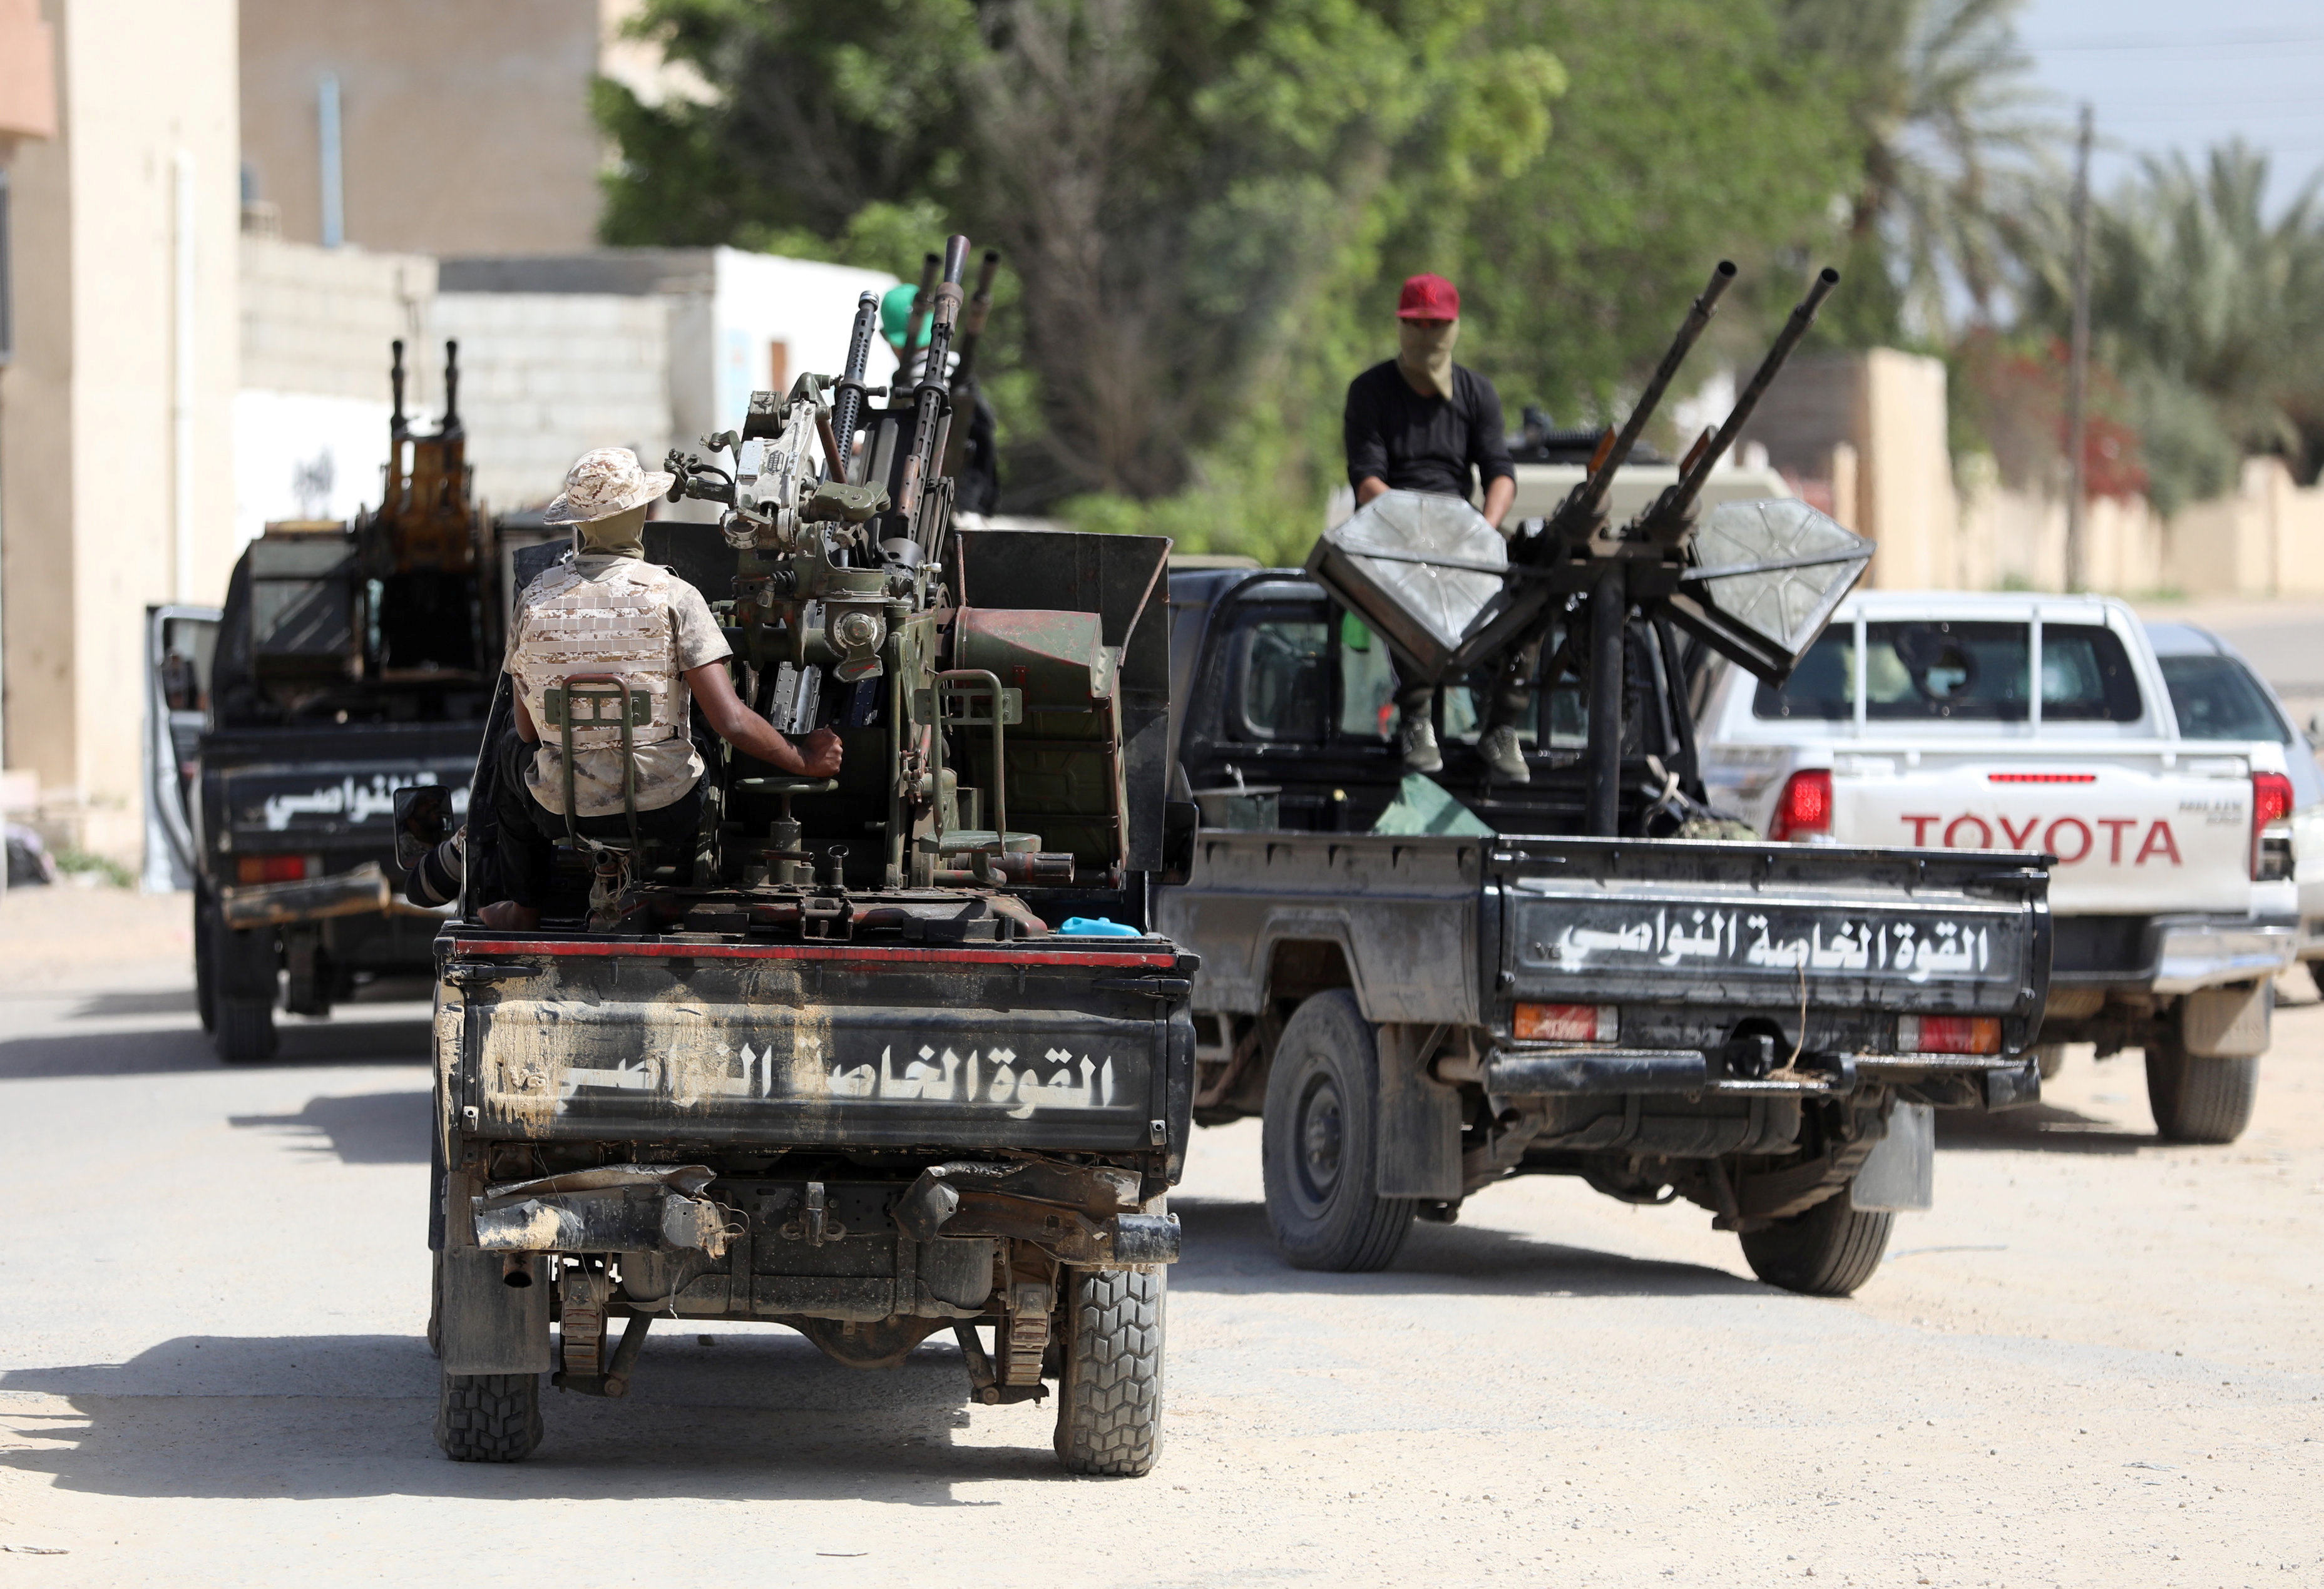 Members of Libyan internationally recognised pro-government forces are seen in military vehicles on the outskirts of Tripoli